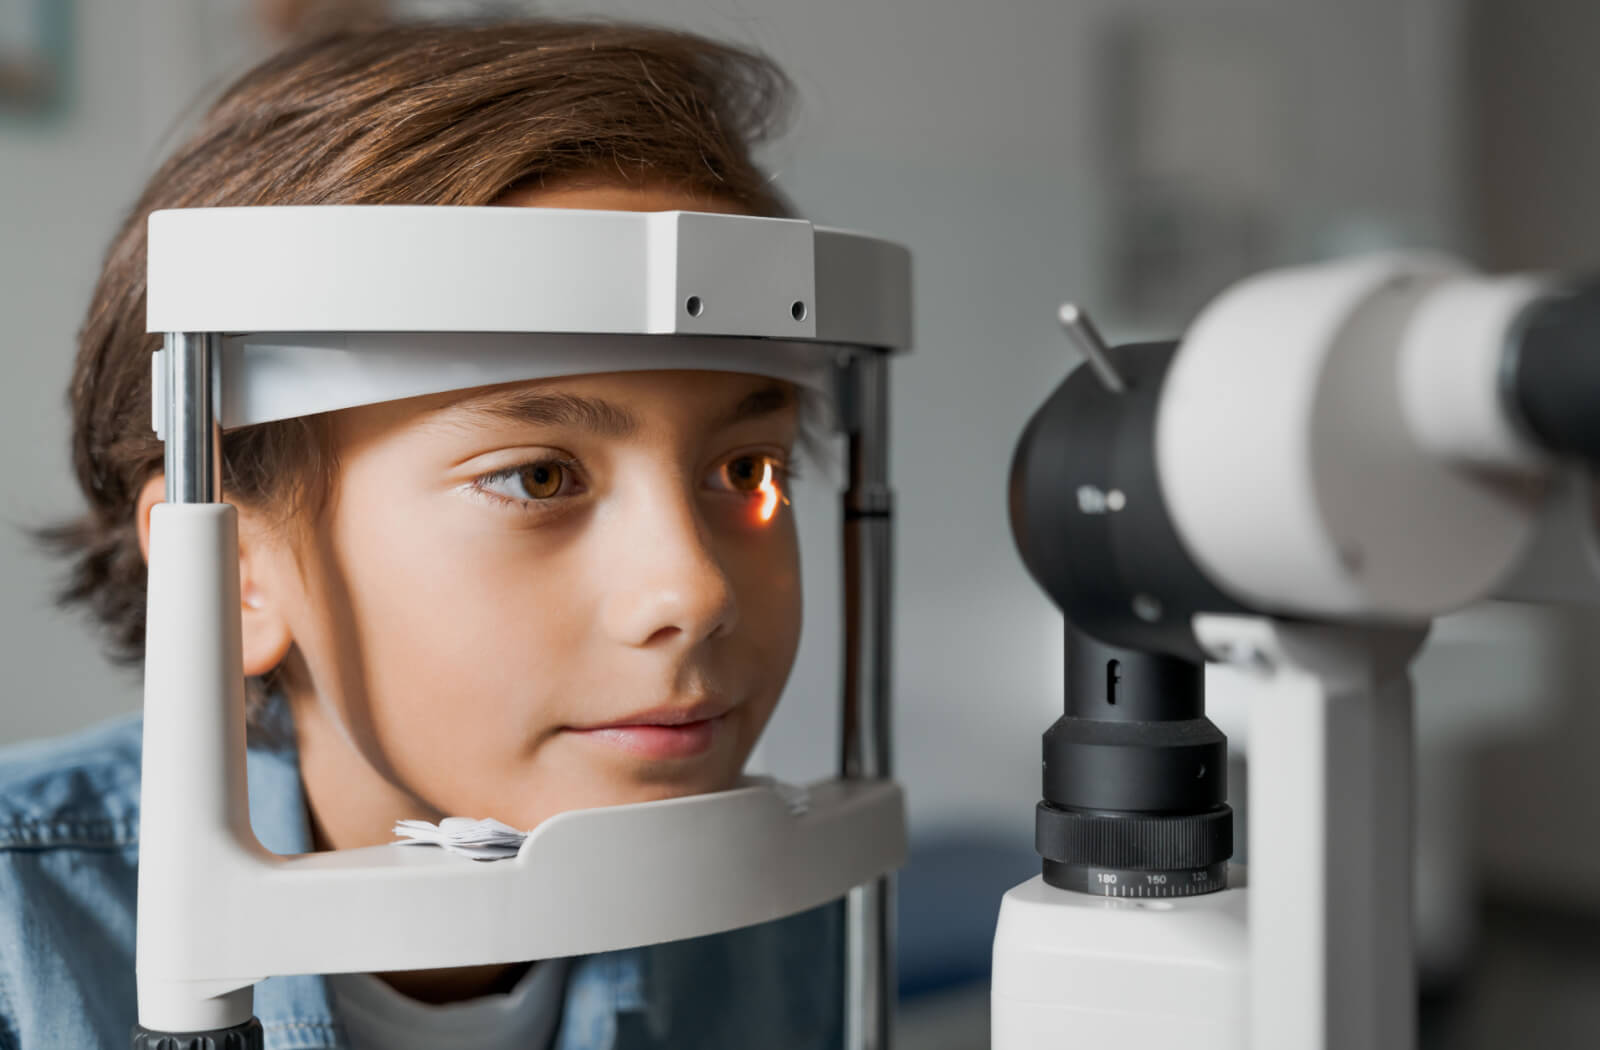 A male child sitting in an optometrist's office looking into a machine that tests his vision.